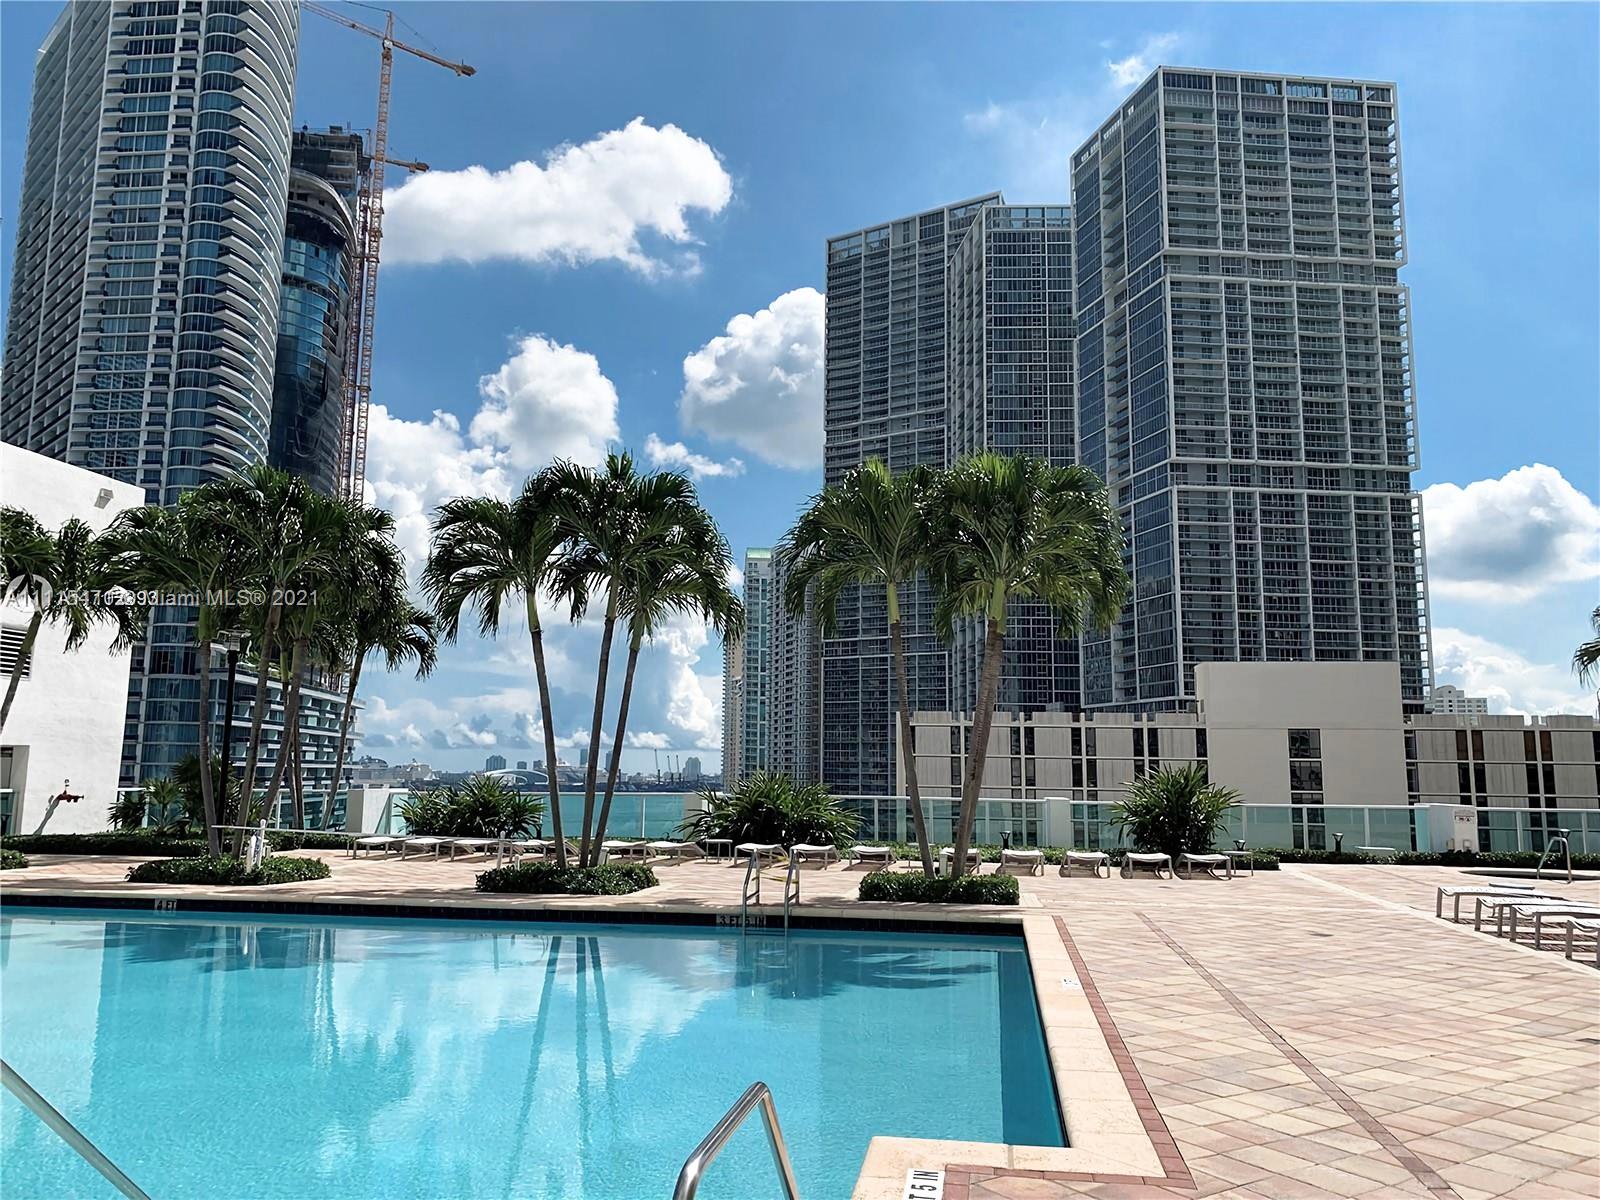 Photo 29 of Brickell On The River S T Apt 1901 in Miami - MLS A11115471